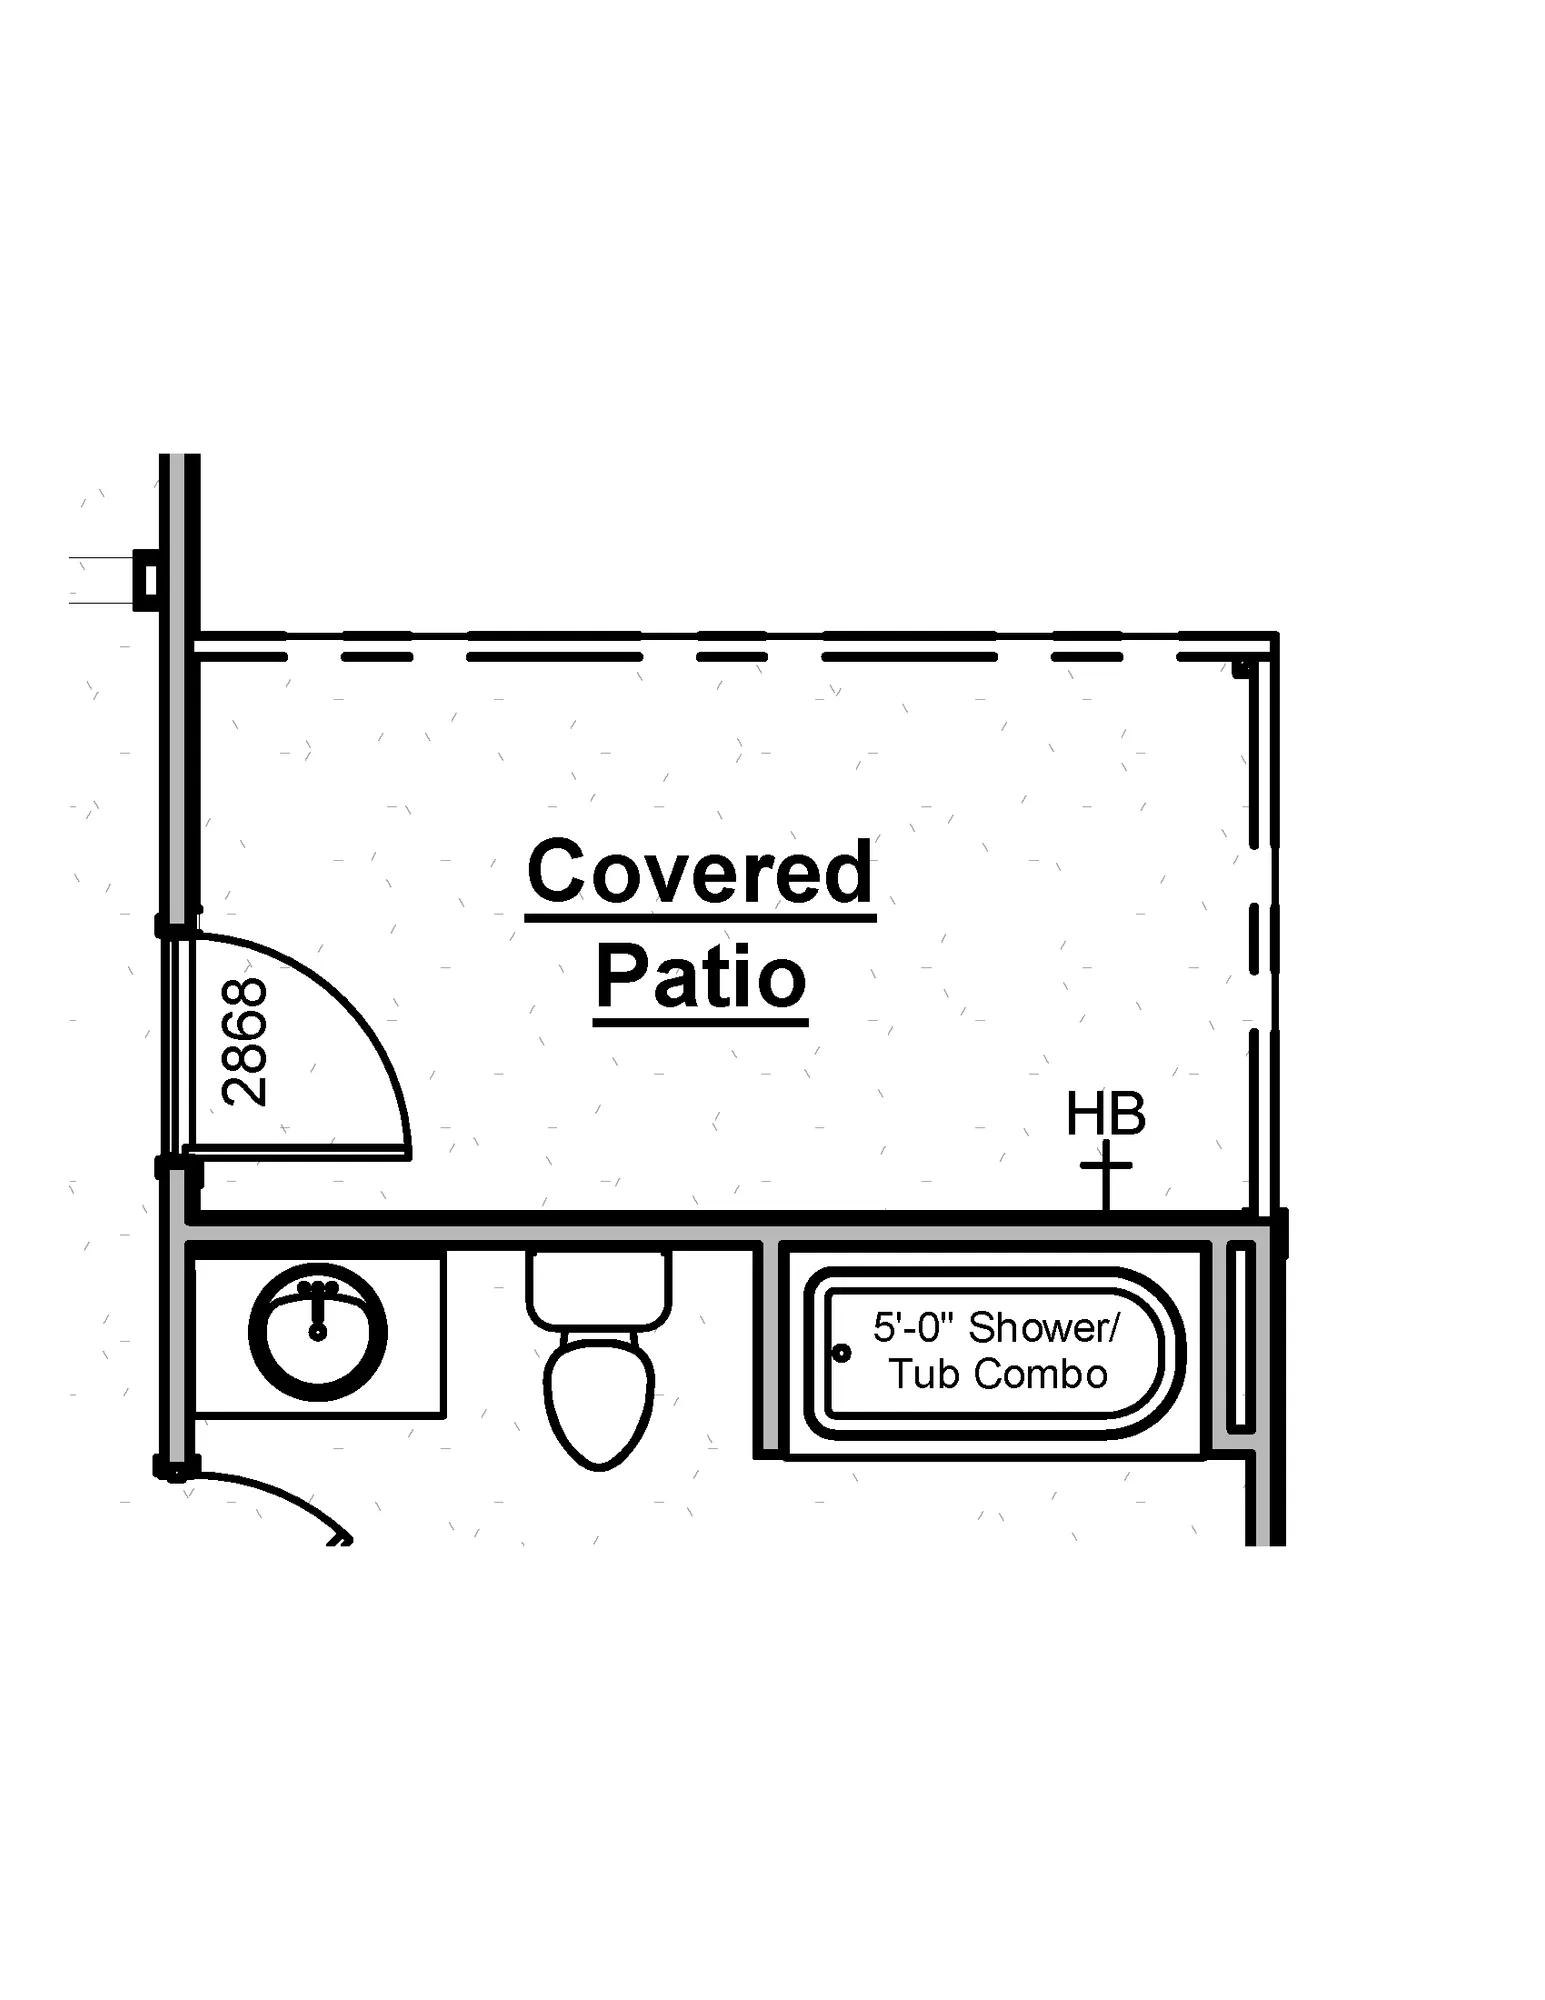 Covered Patio - undefined